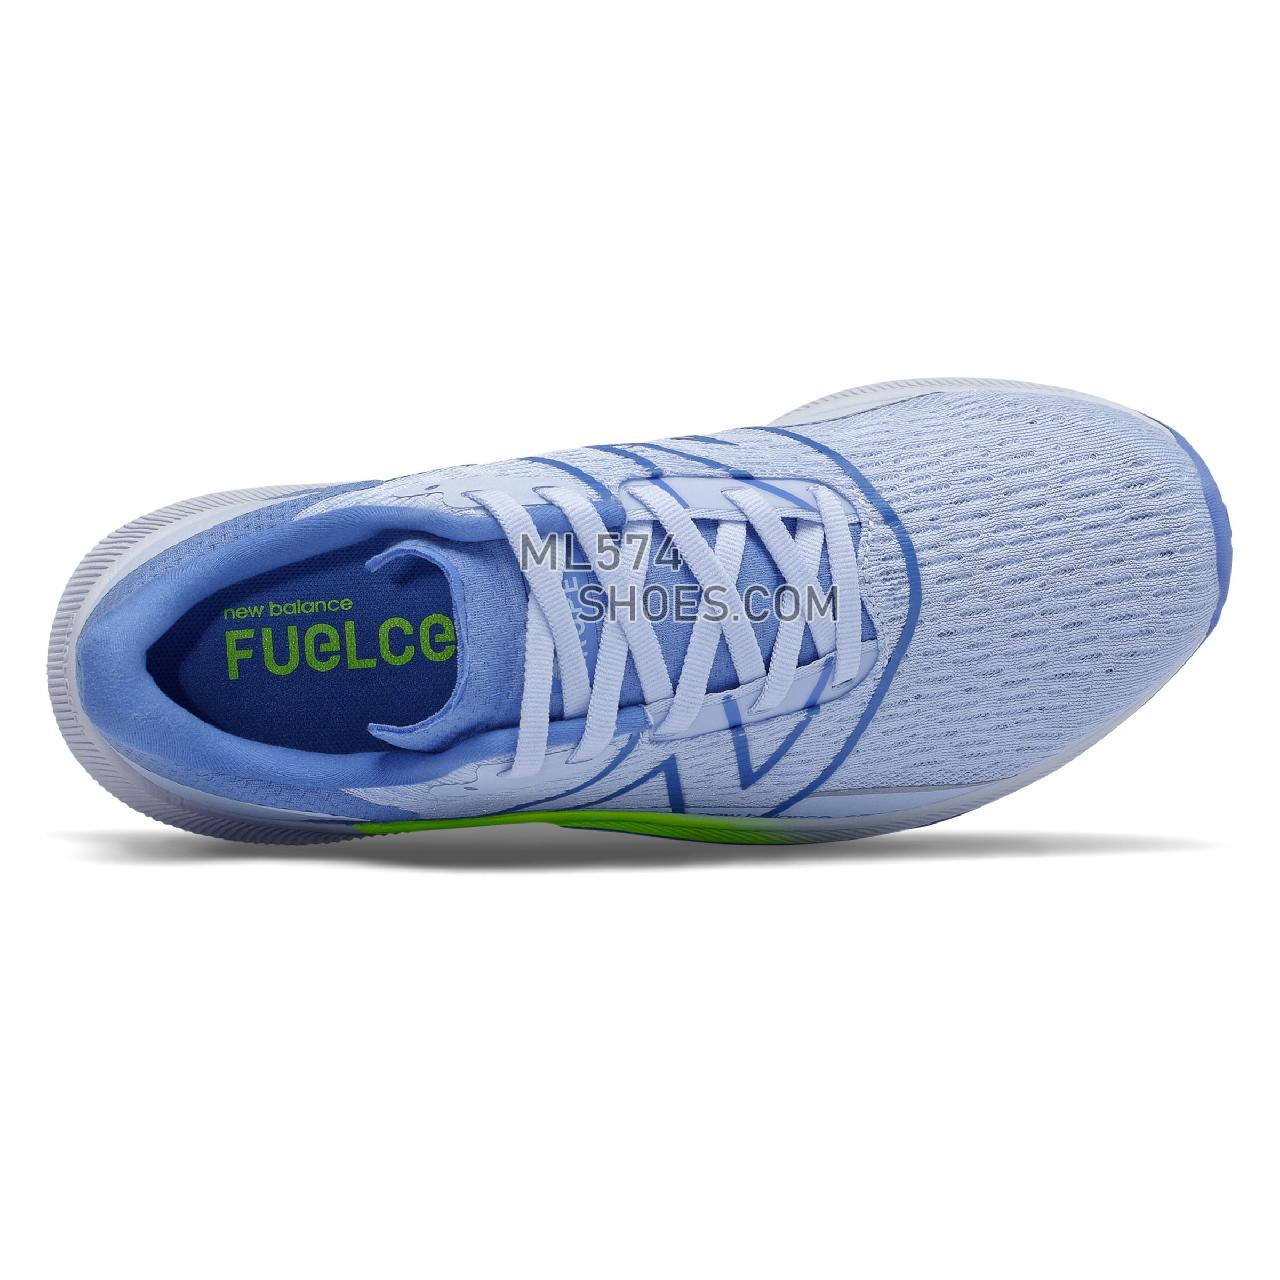 New Balance FuelCell Propel v2 - Women's Fuelcell Sleek And LightWeight - Frost with Faded Cobalt - WFCPRPB2